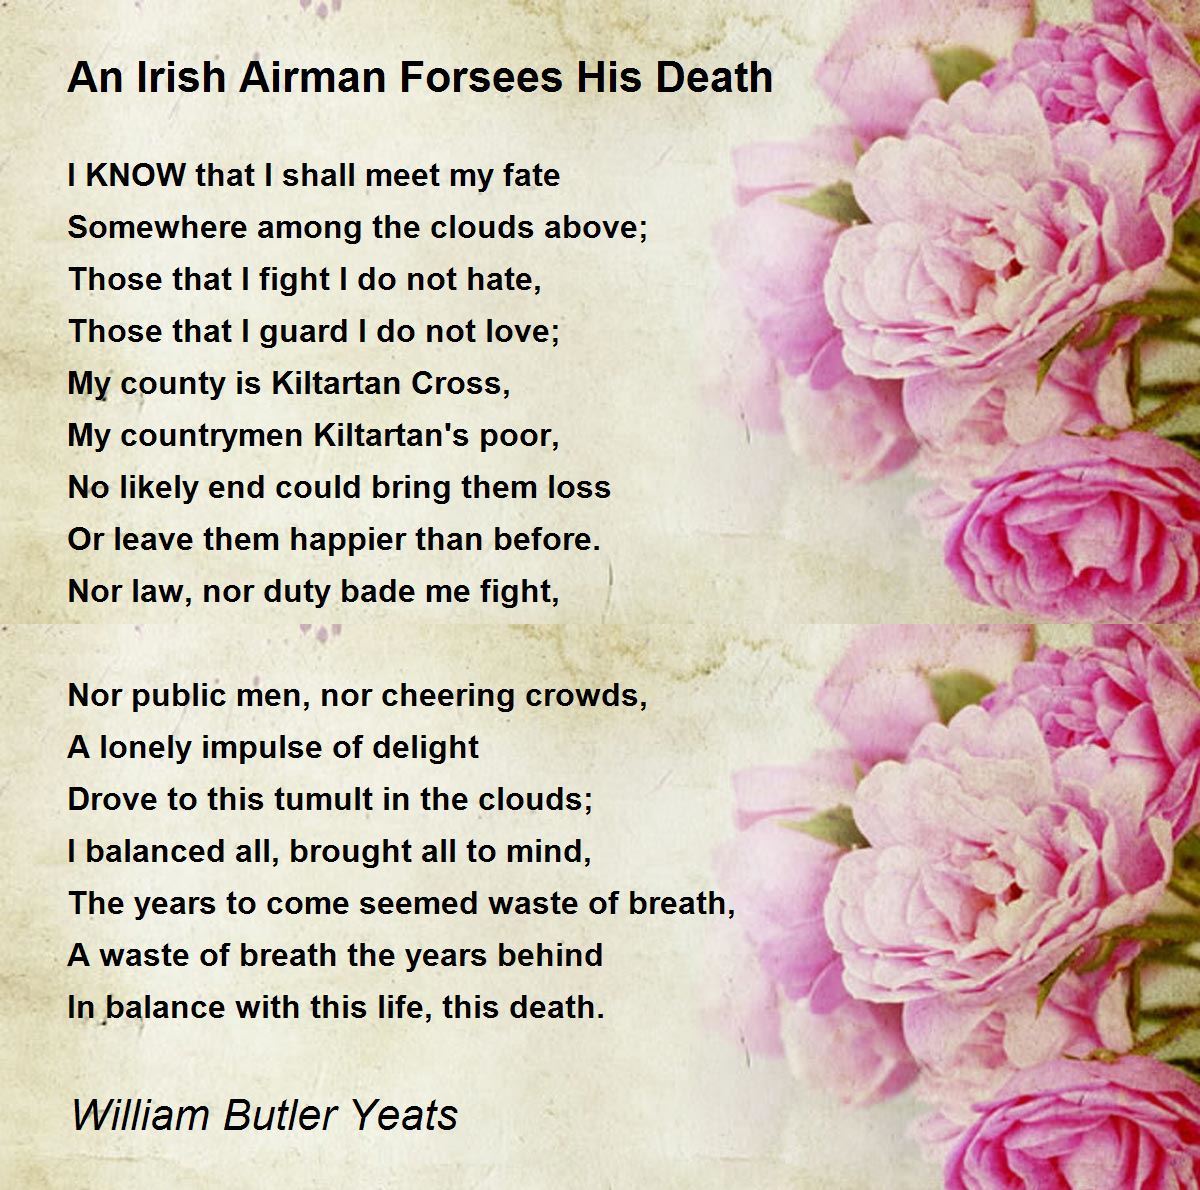 An Irish Airman Forsees His Death Poem by William Butler Yeats - Poem